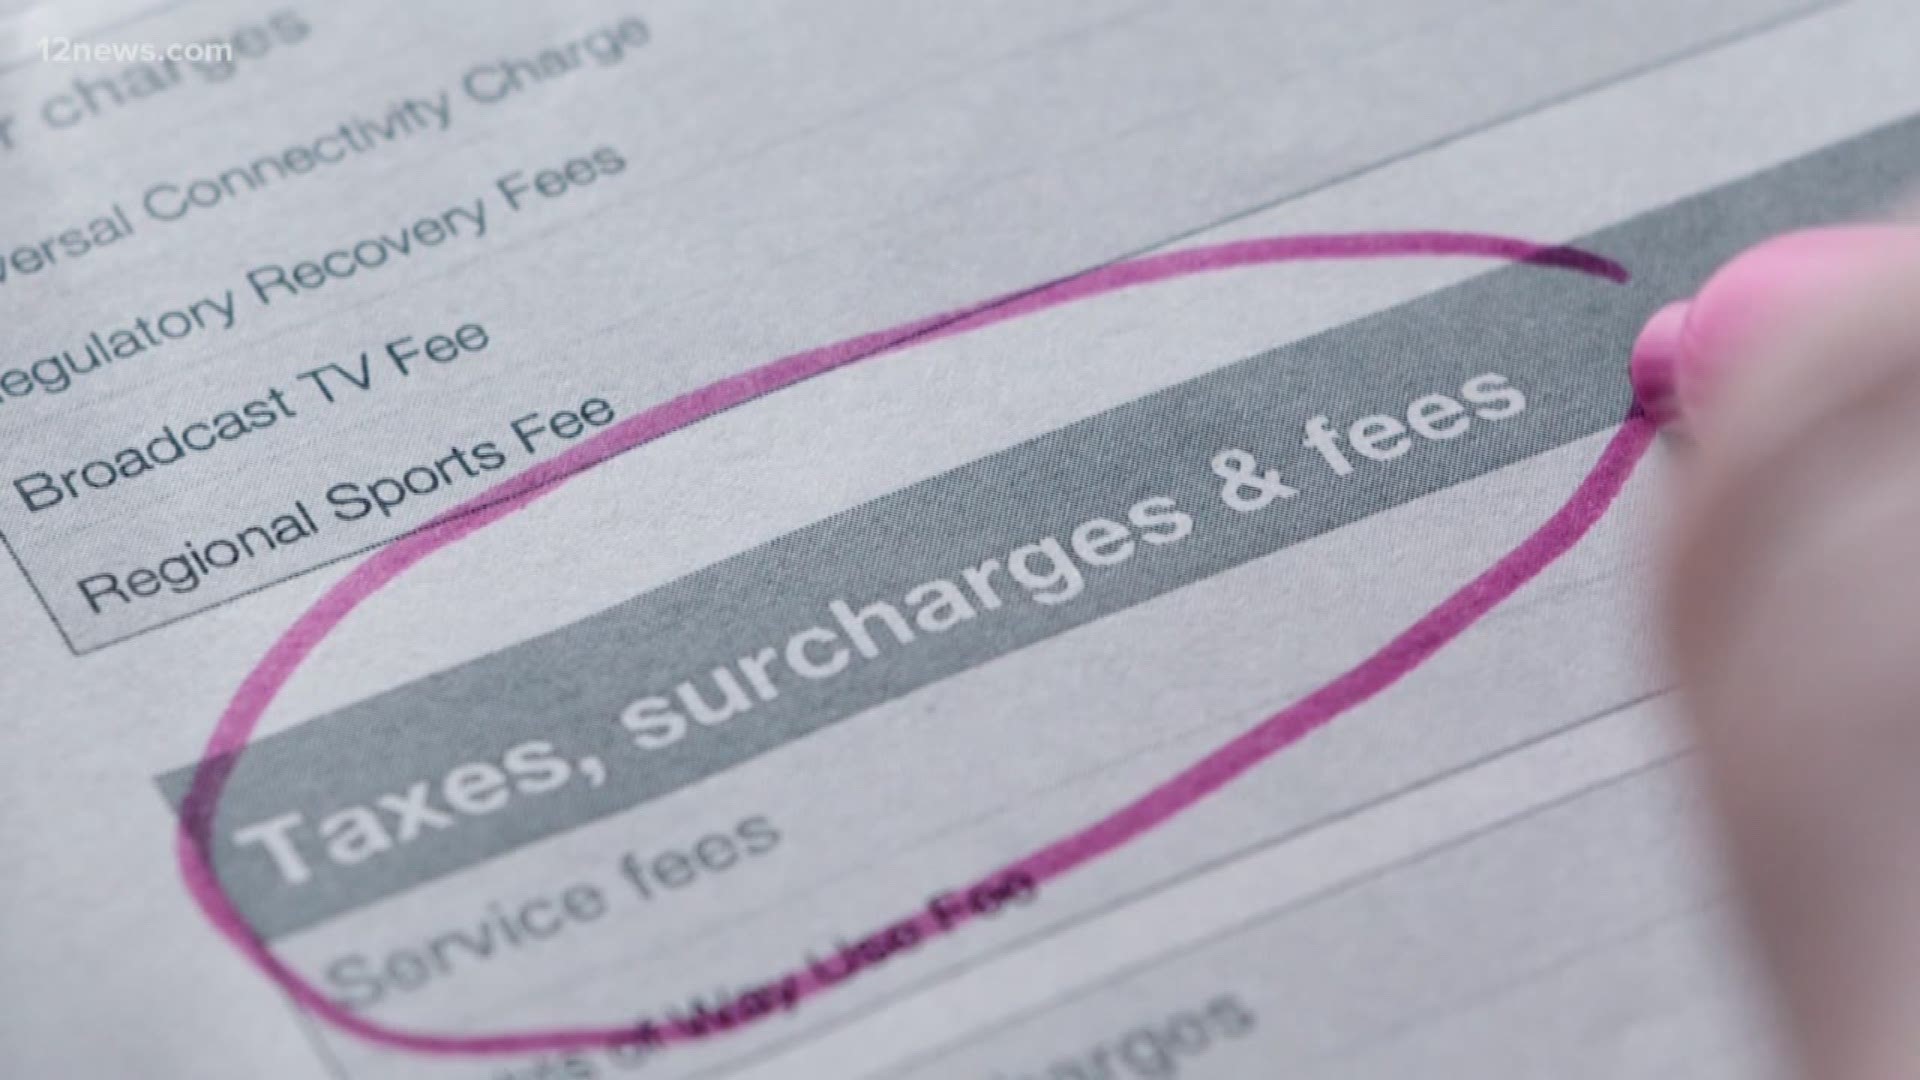 Fees, across a wide range of industries, are siphoning billions of dollars out of Americans' wallets each year. Here's how to spot, negotiate, and avoid extra fees altogether.